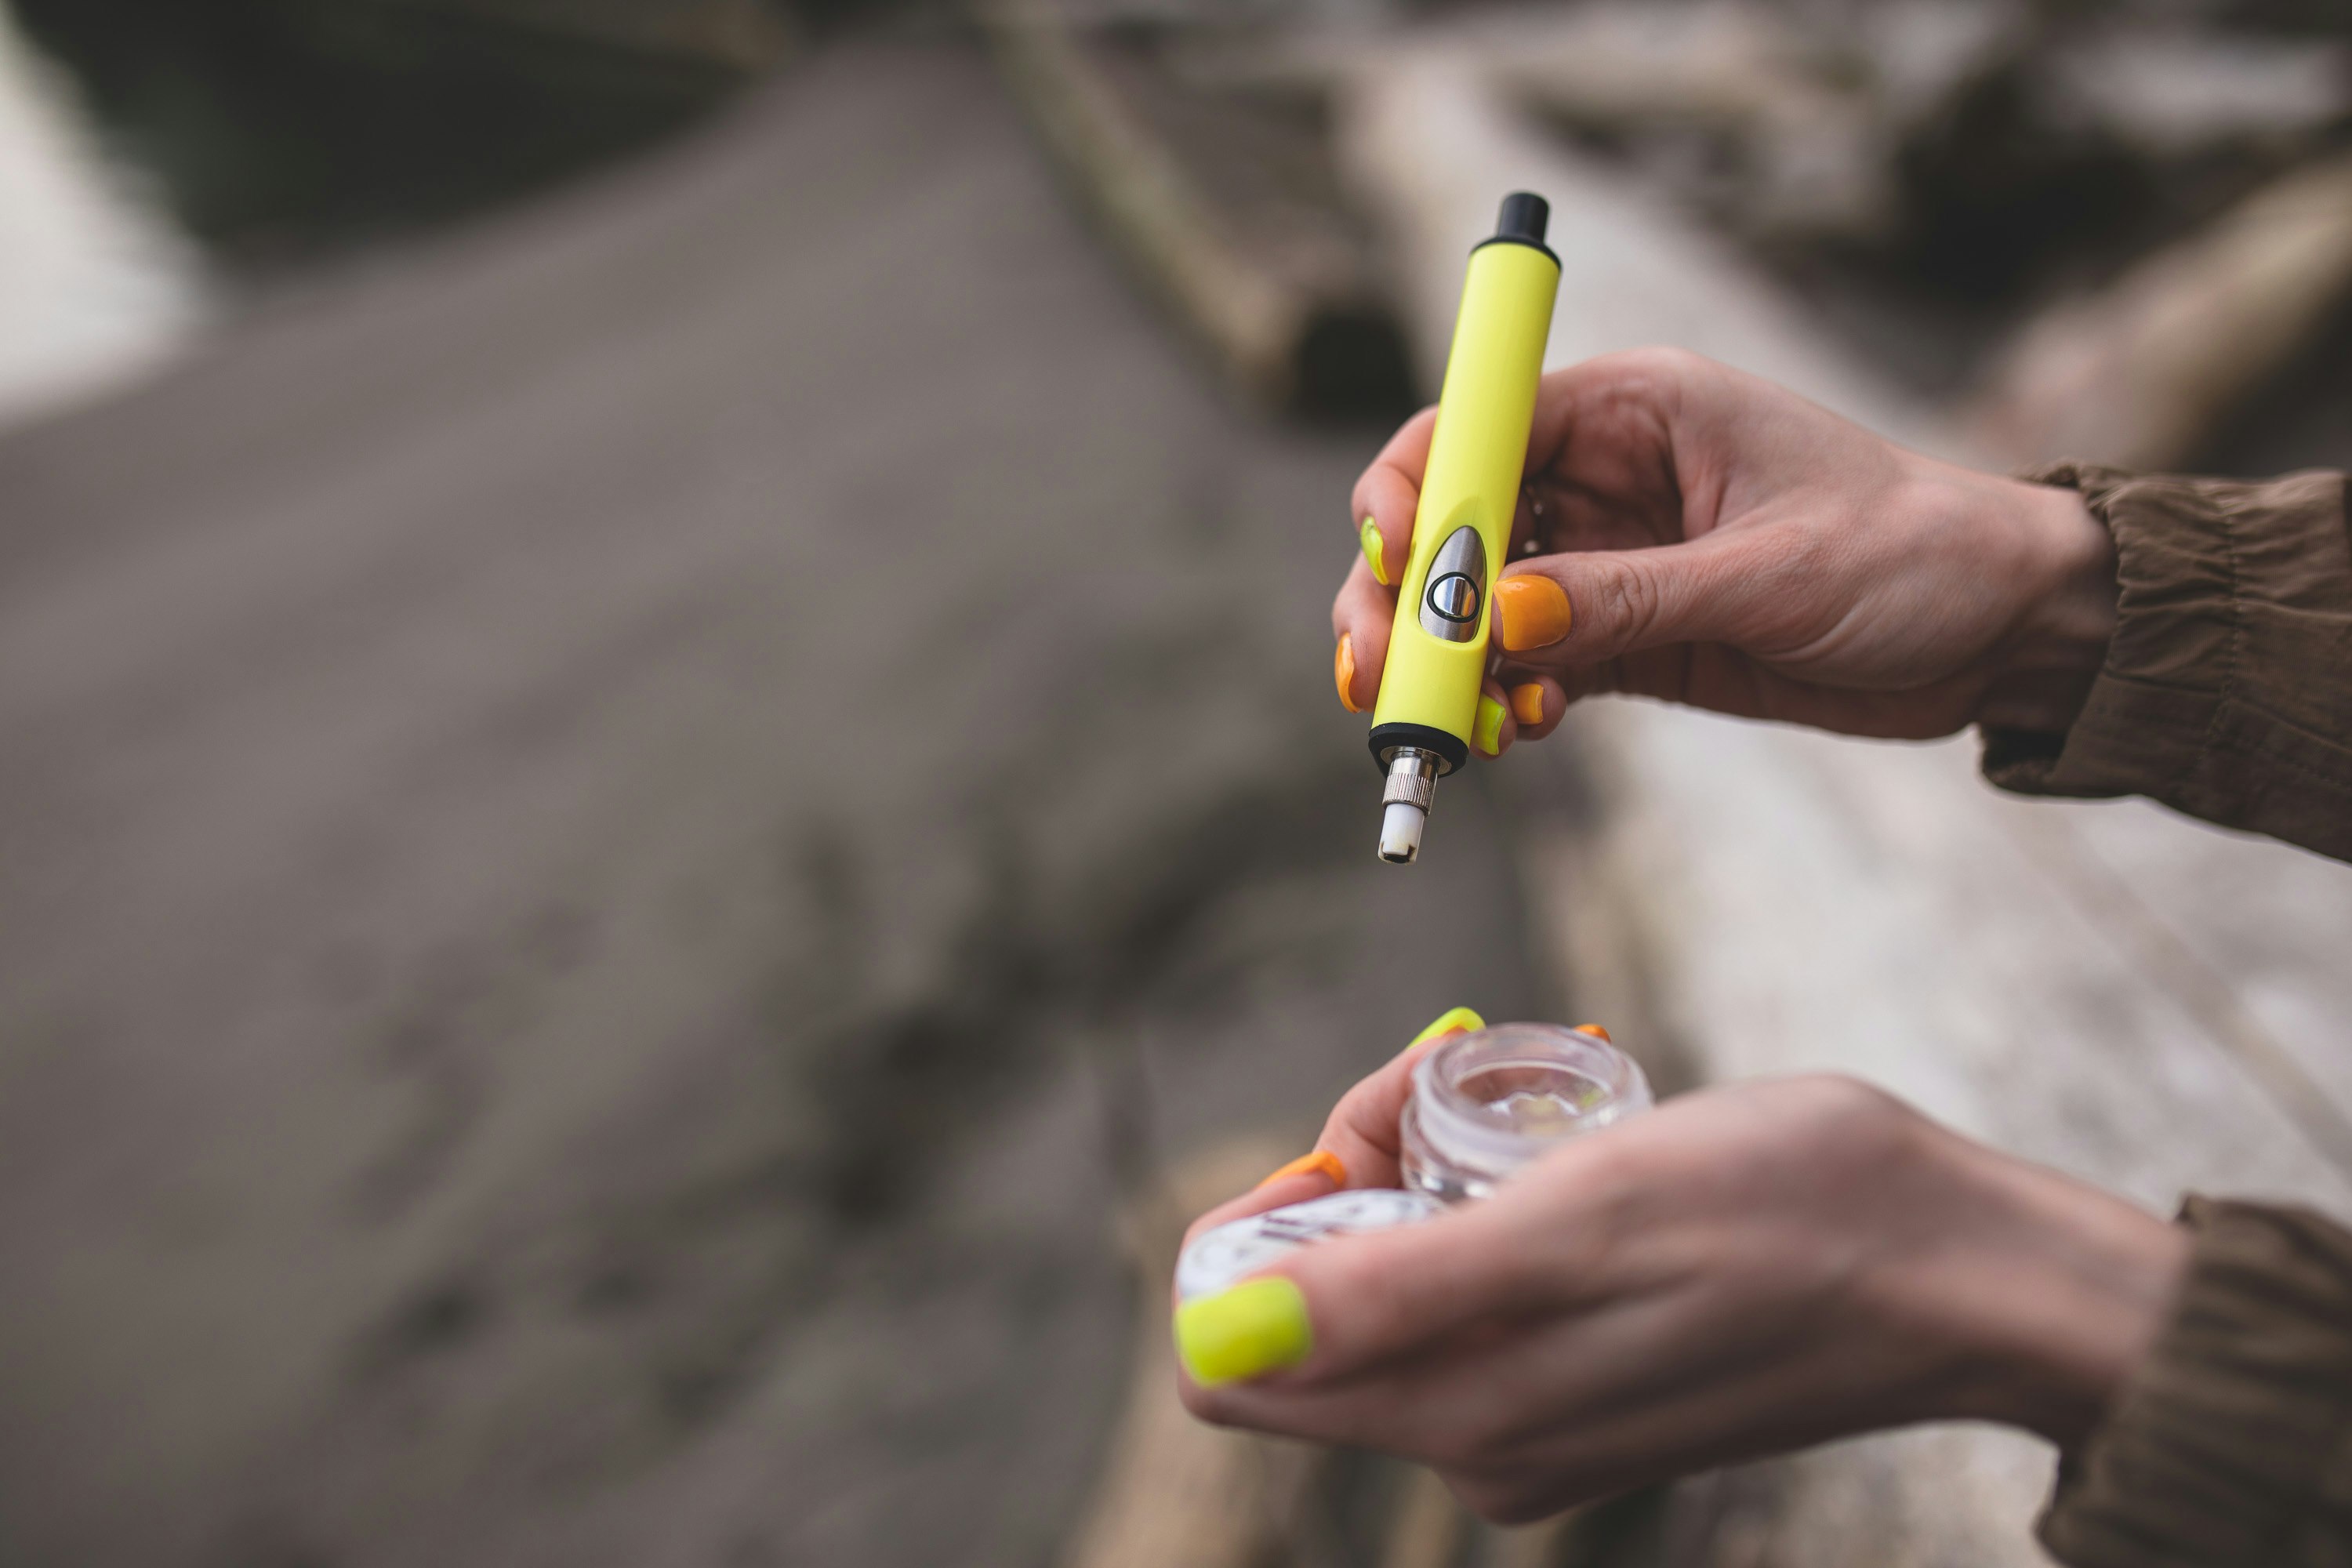 A woman loads a yellow Dip Devices Little Dipper concentrate vaporizer dab straw with cannabis extract. She has bright yellow nails.

See more at https://dipdevices.com/ 